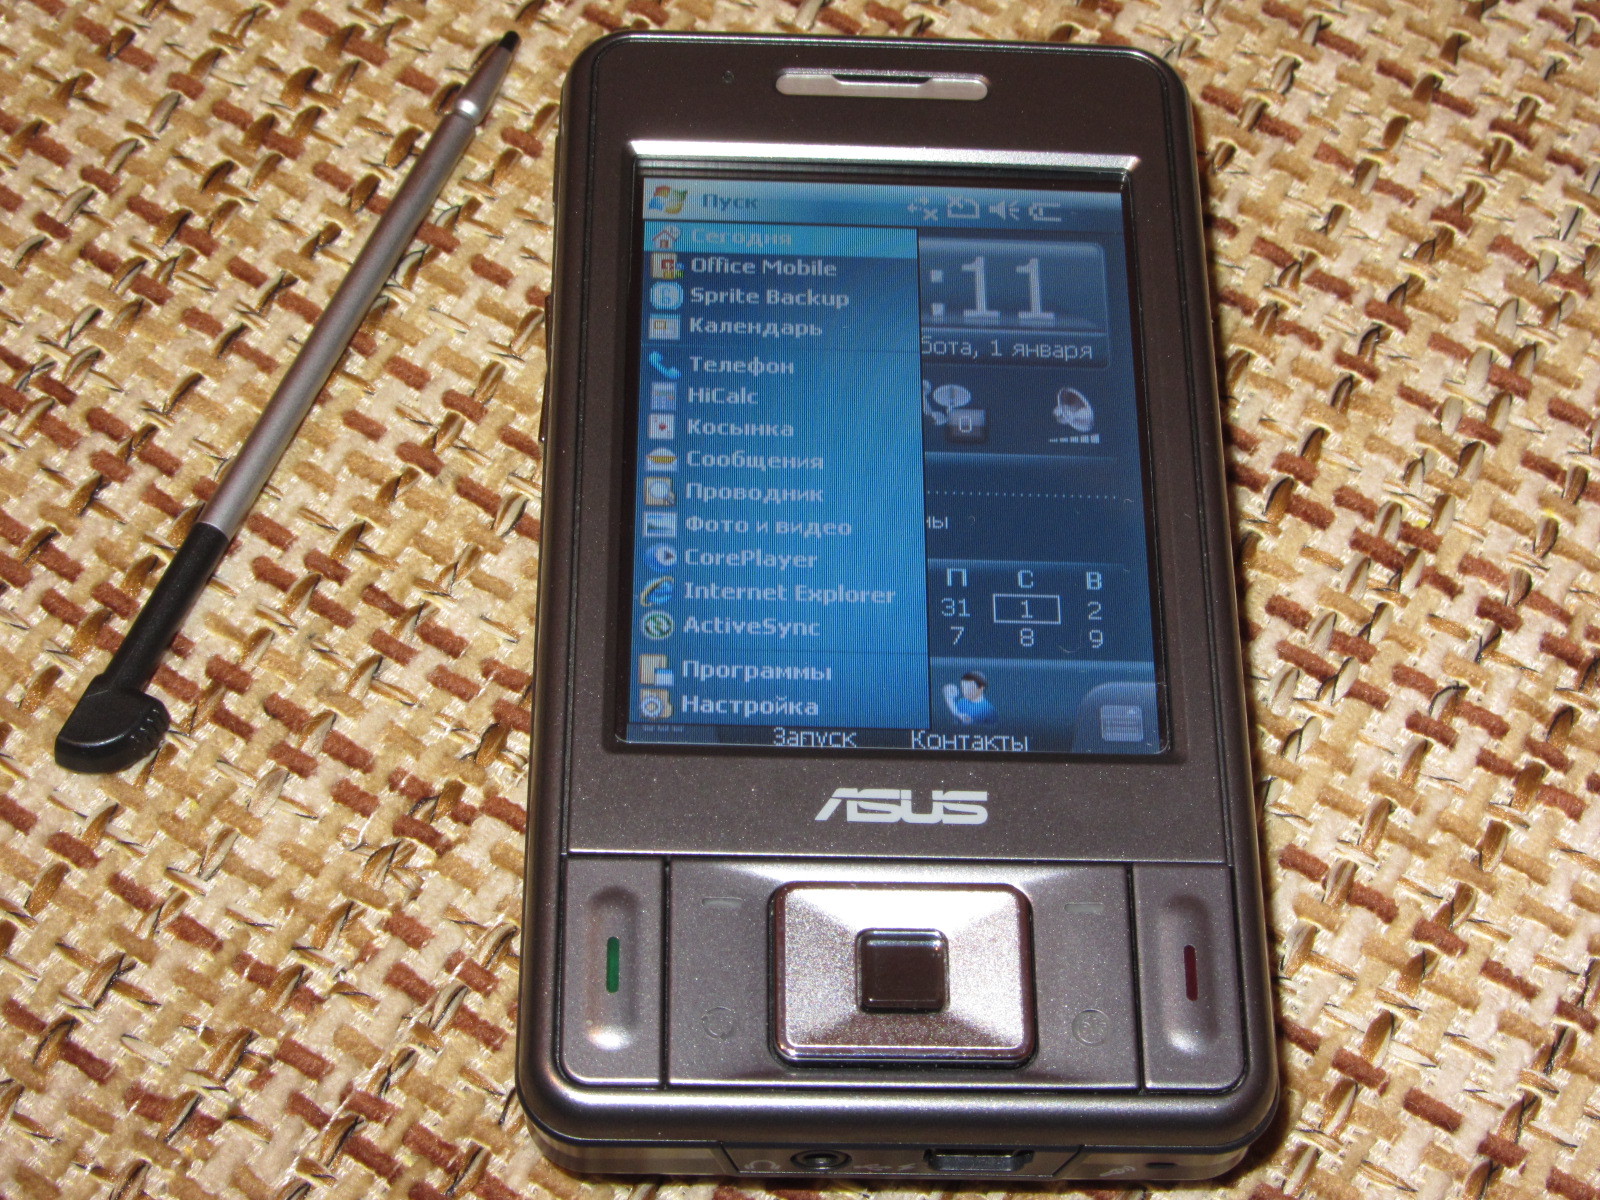 Communicator 2007 on Windows Mobile ASUS P535 aka LKS! From the time capsule! - Mobile phones, Smartphone, Kpc, Windows mobile, , Time capsule, Longpost, Asus